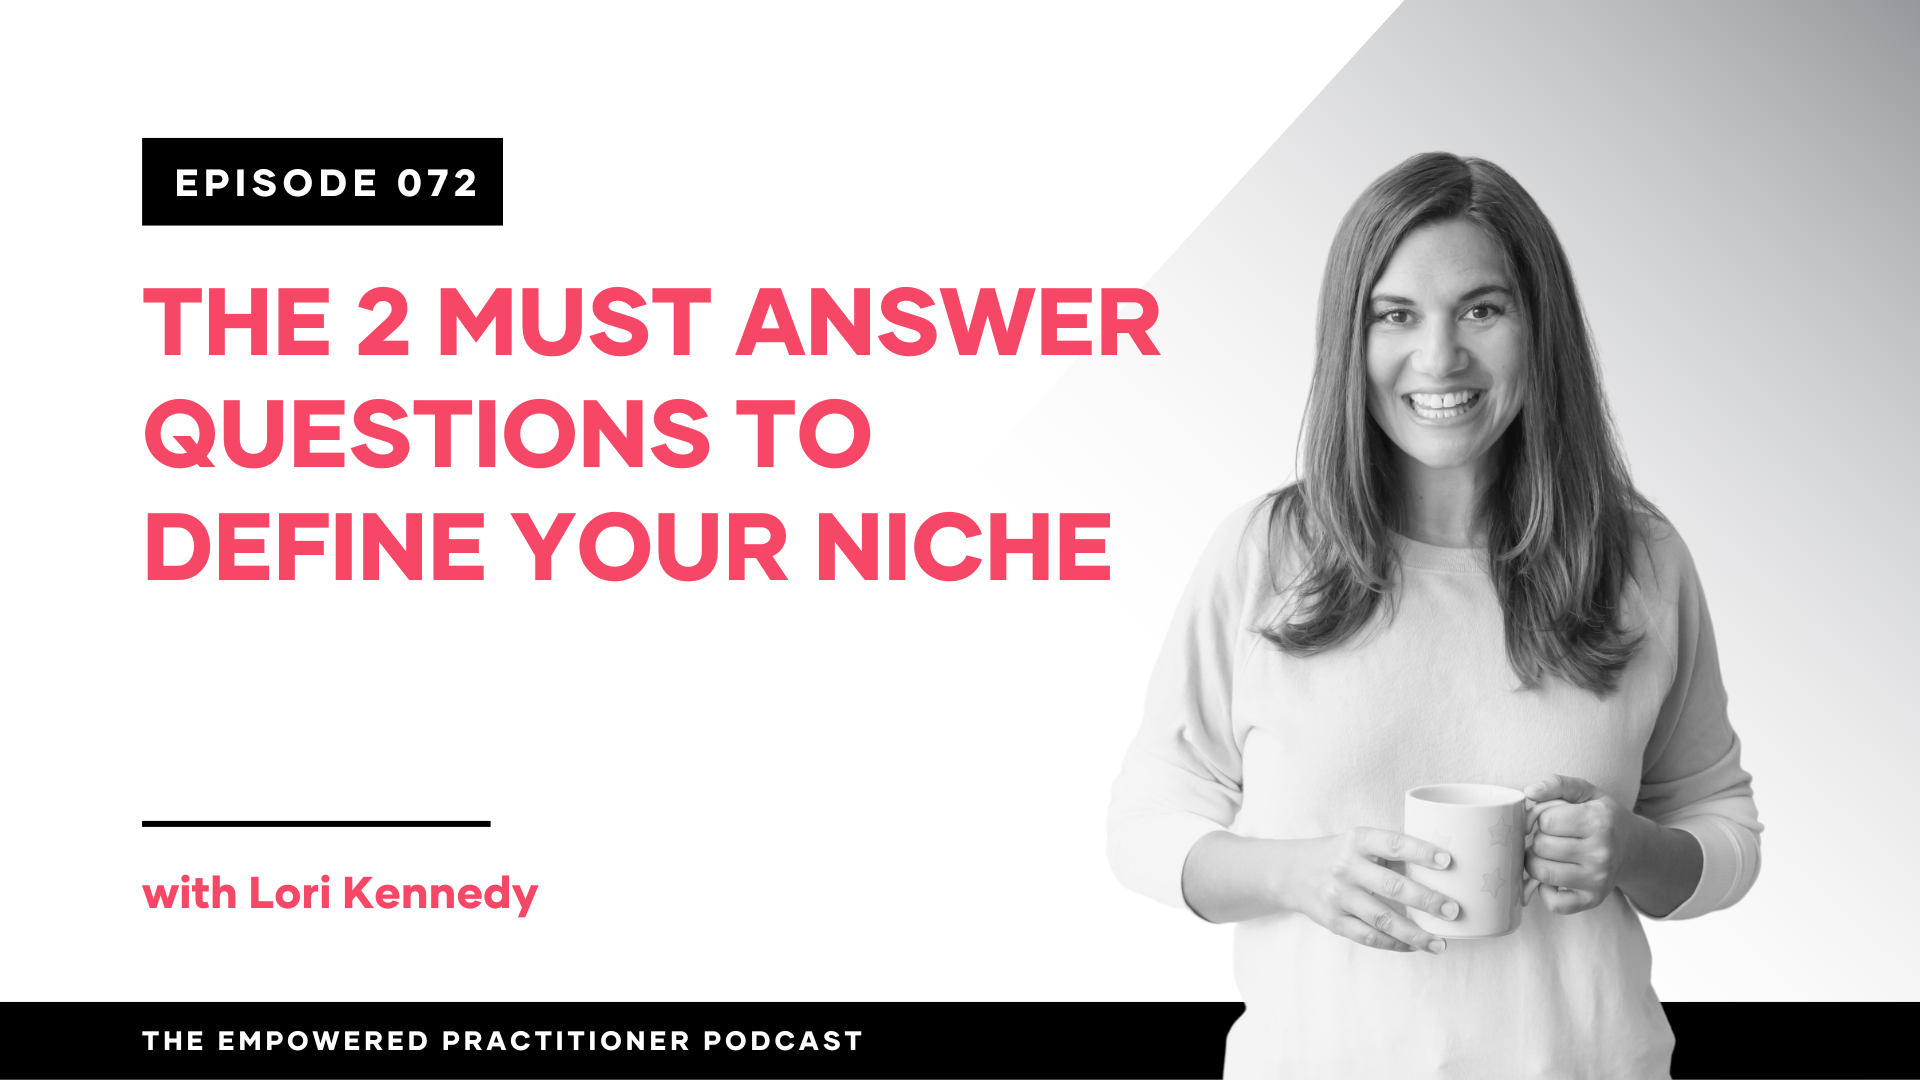 The 2 Must Answer Questions To Define Your Niche